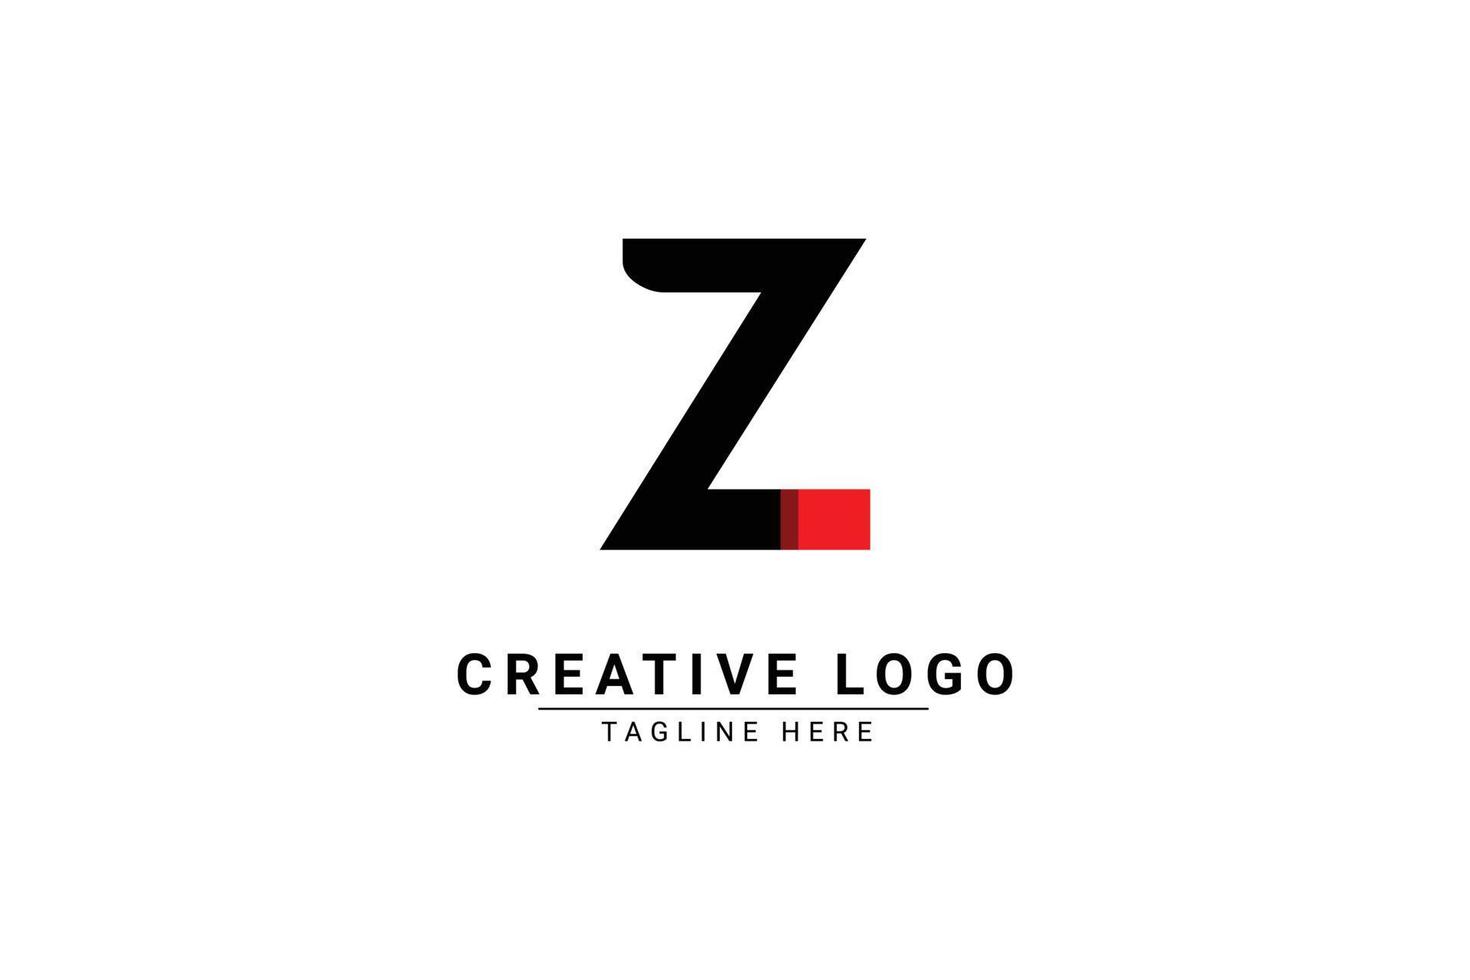 Initial Letter Z Logo. Red and black shape C Letter logo with shadow usable for Business and Branding Logos. Flat Vector Logo Design Template Element.